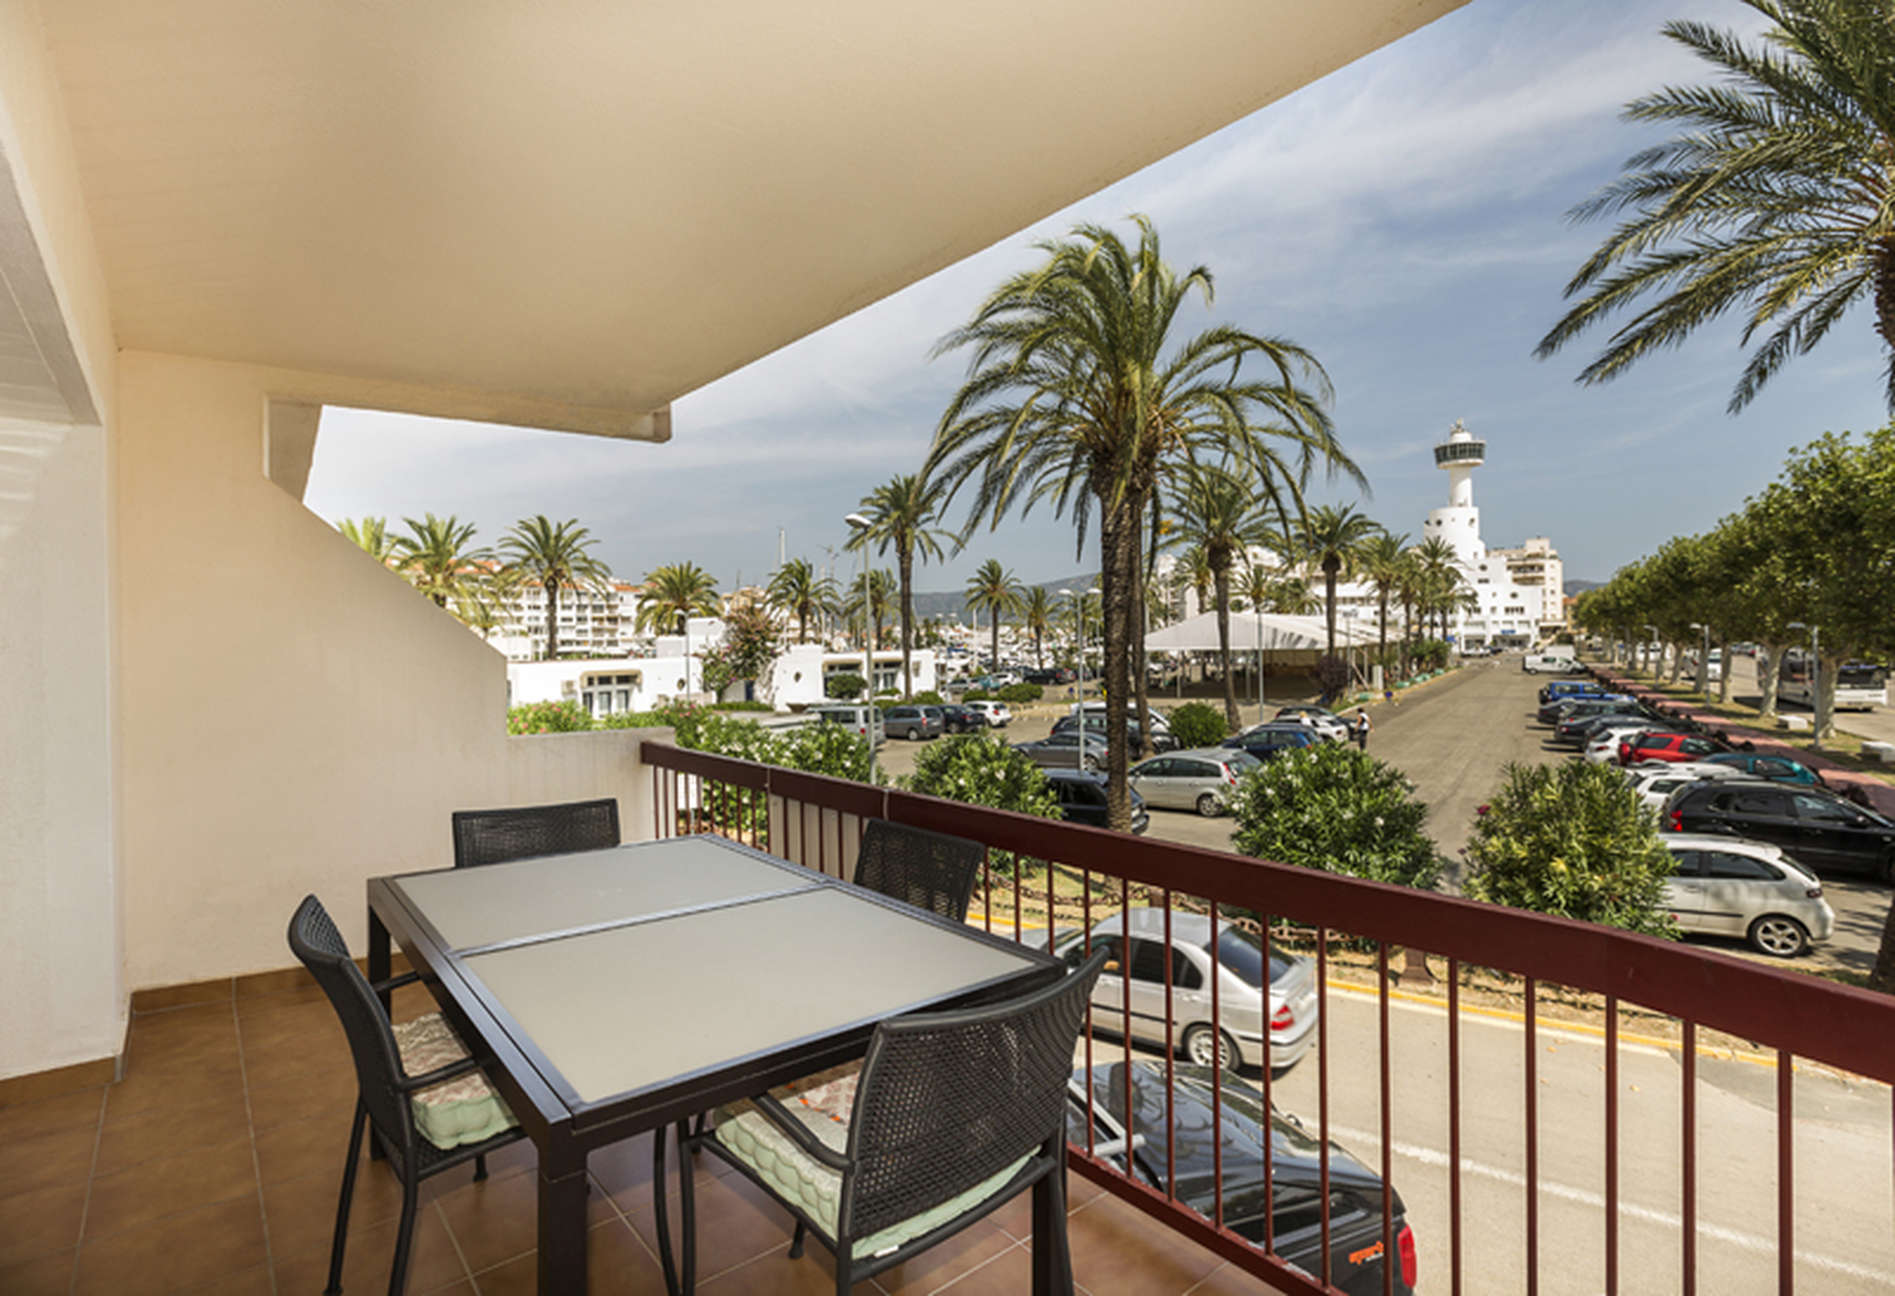 Modern 2 bedroom Appartment situated in the harbour of Empuriabrava.